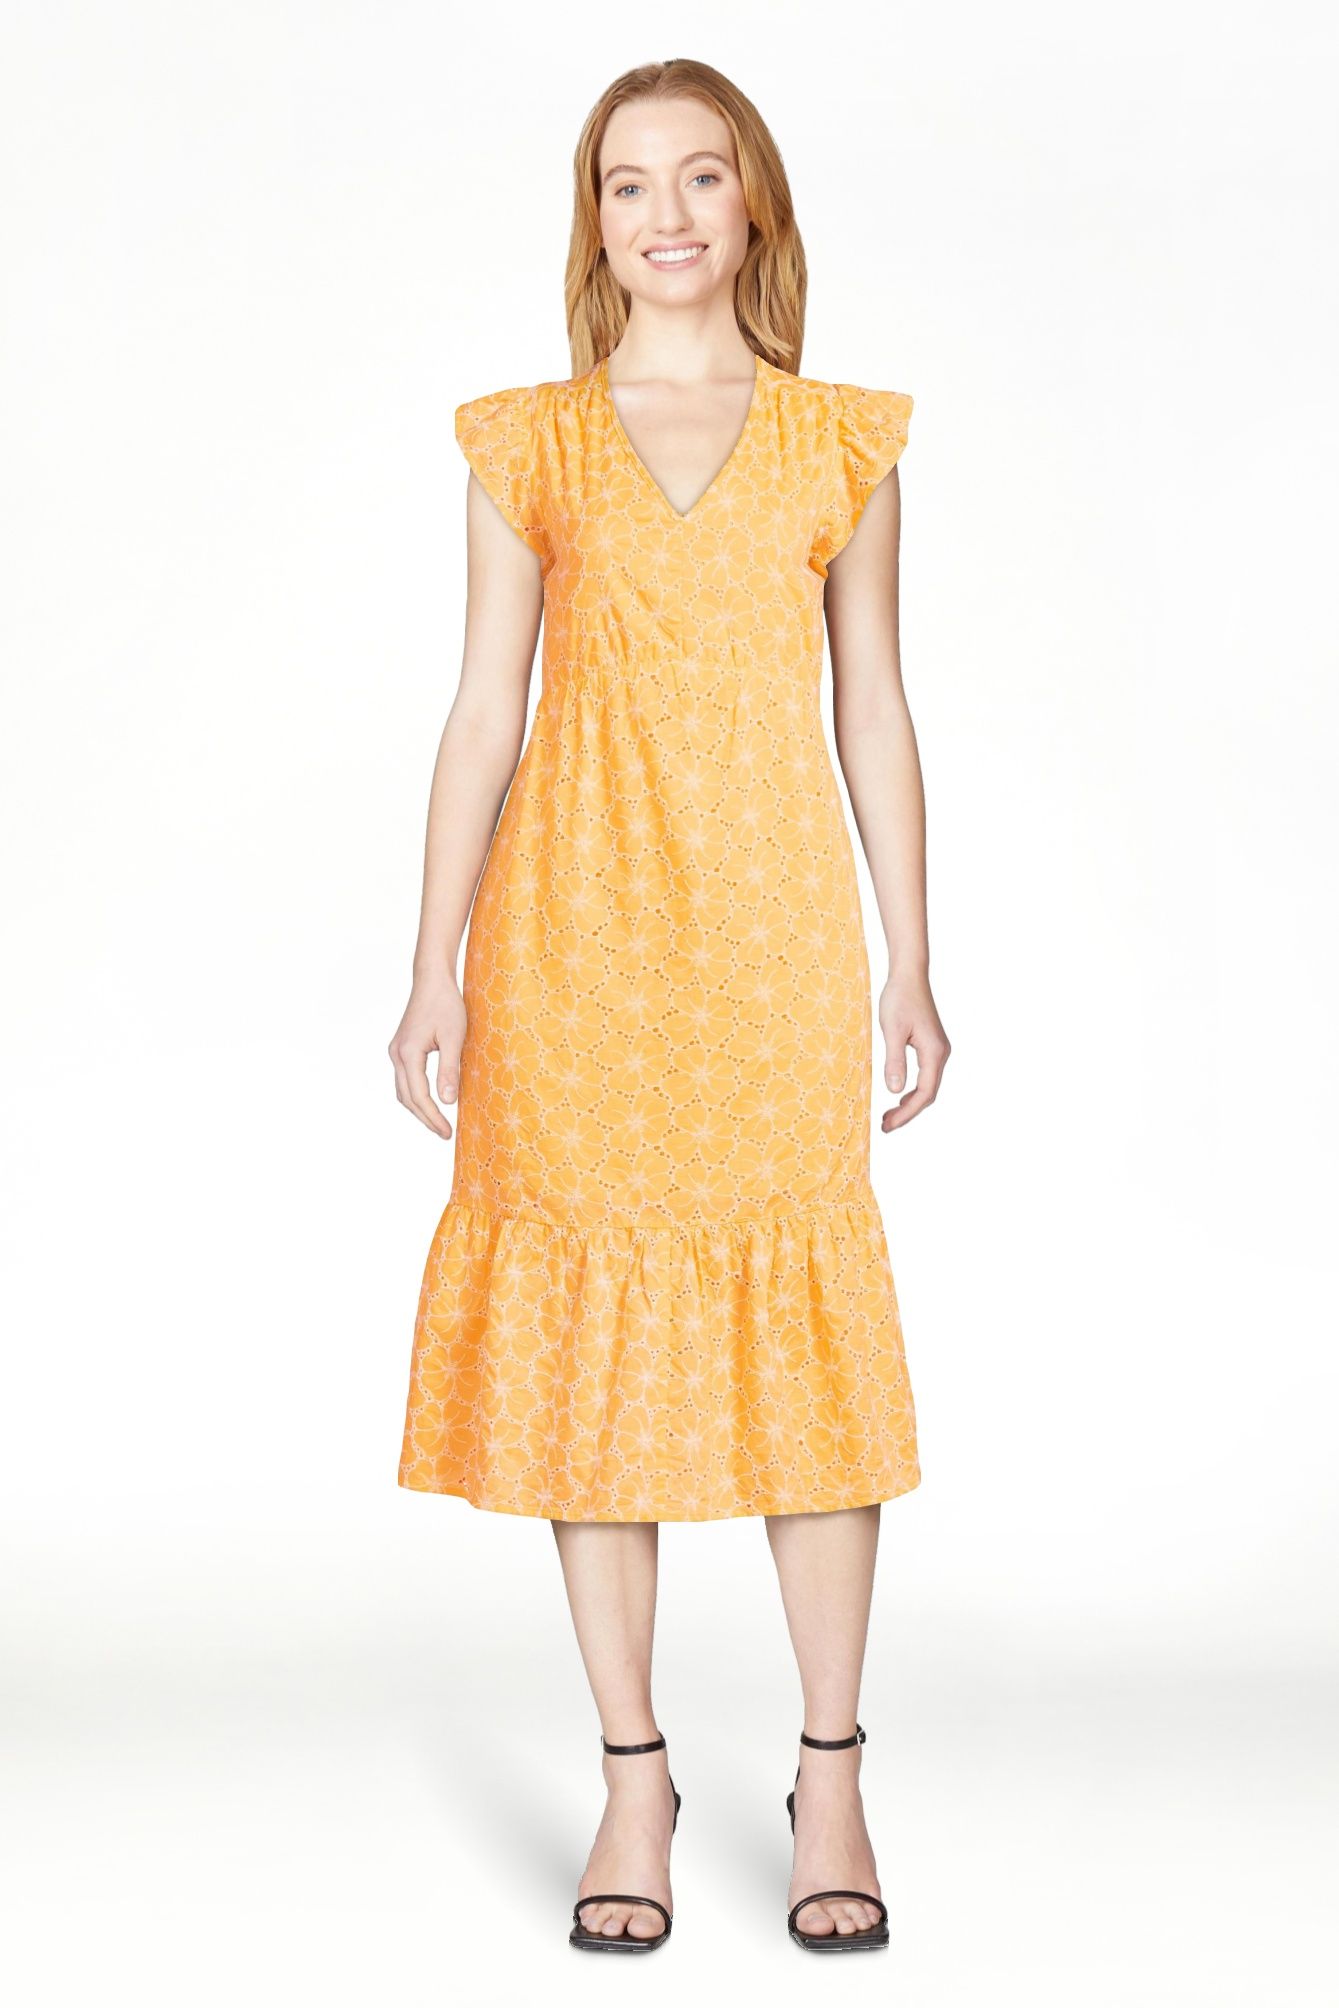 Time and Tru Women's Floral Eyelet Dress with Flutter Sleeves, Sizes XS-4X | Walmart (US)